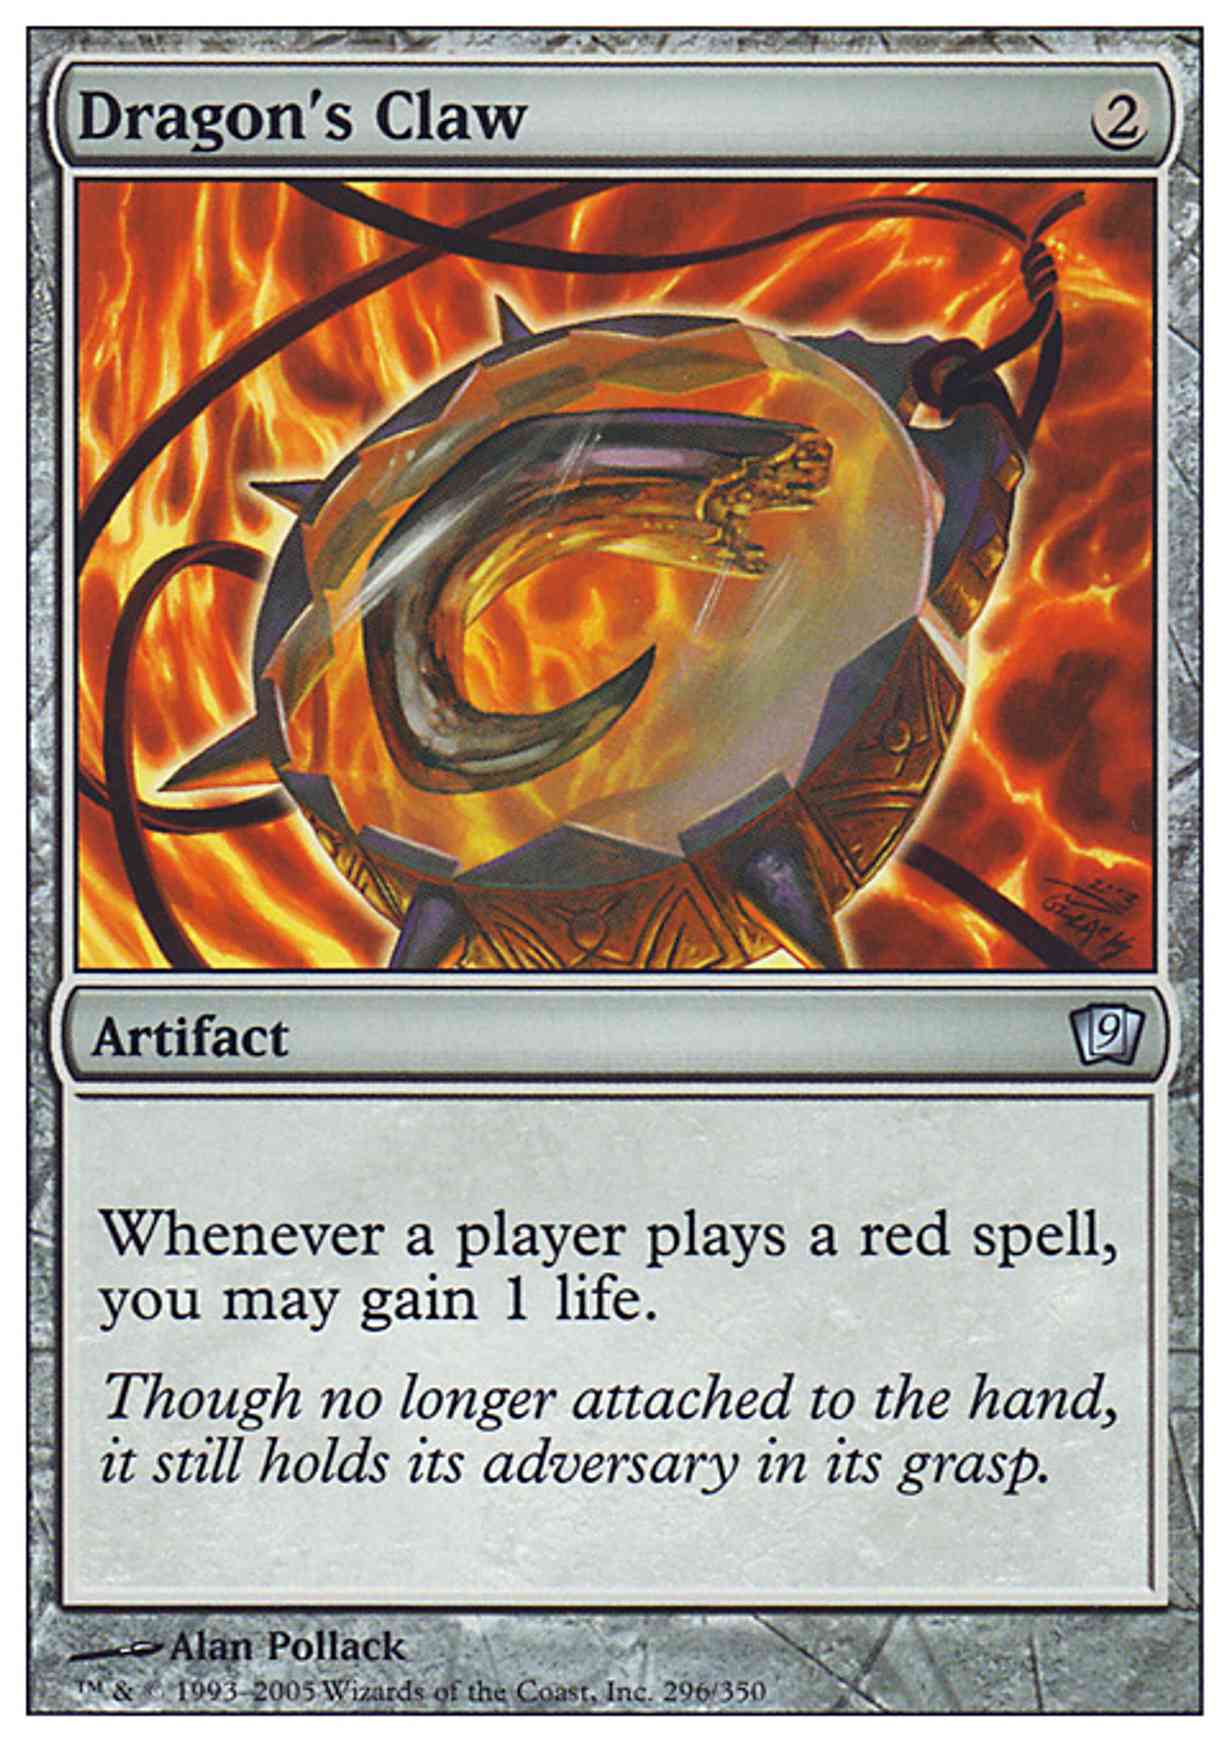 Dragon's Claw magic card front